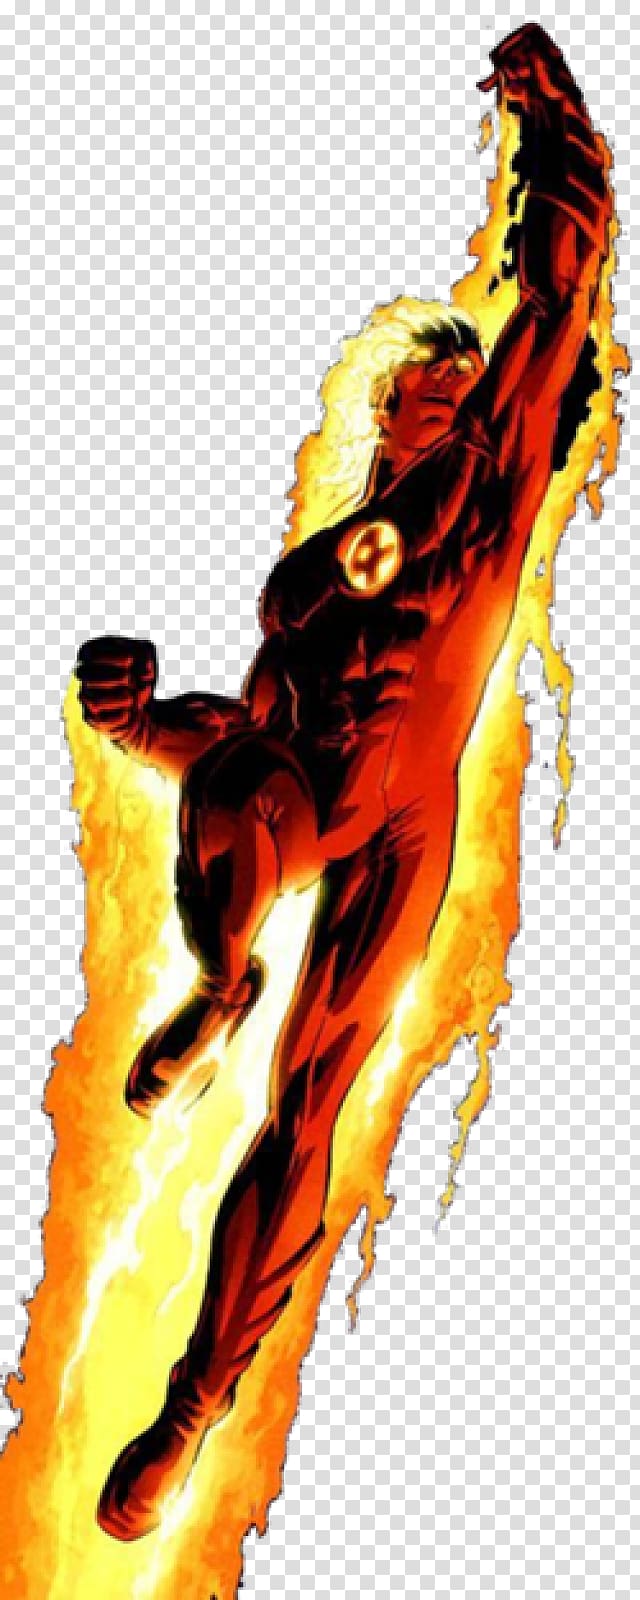 Human Torch Invisible Woman Marvel: Avengers Alliance Mister Fantastic, Human Torch transparent background PNG clipart